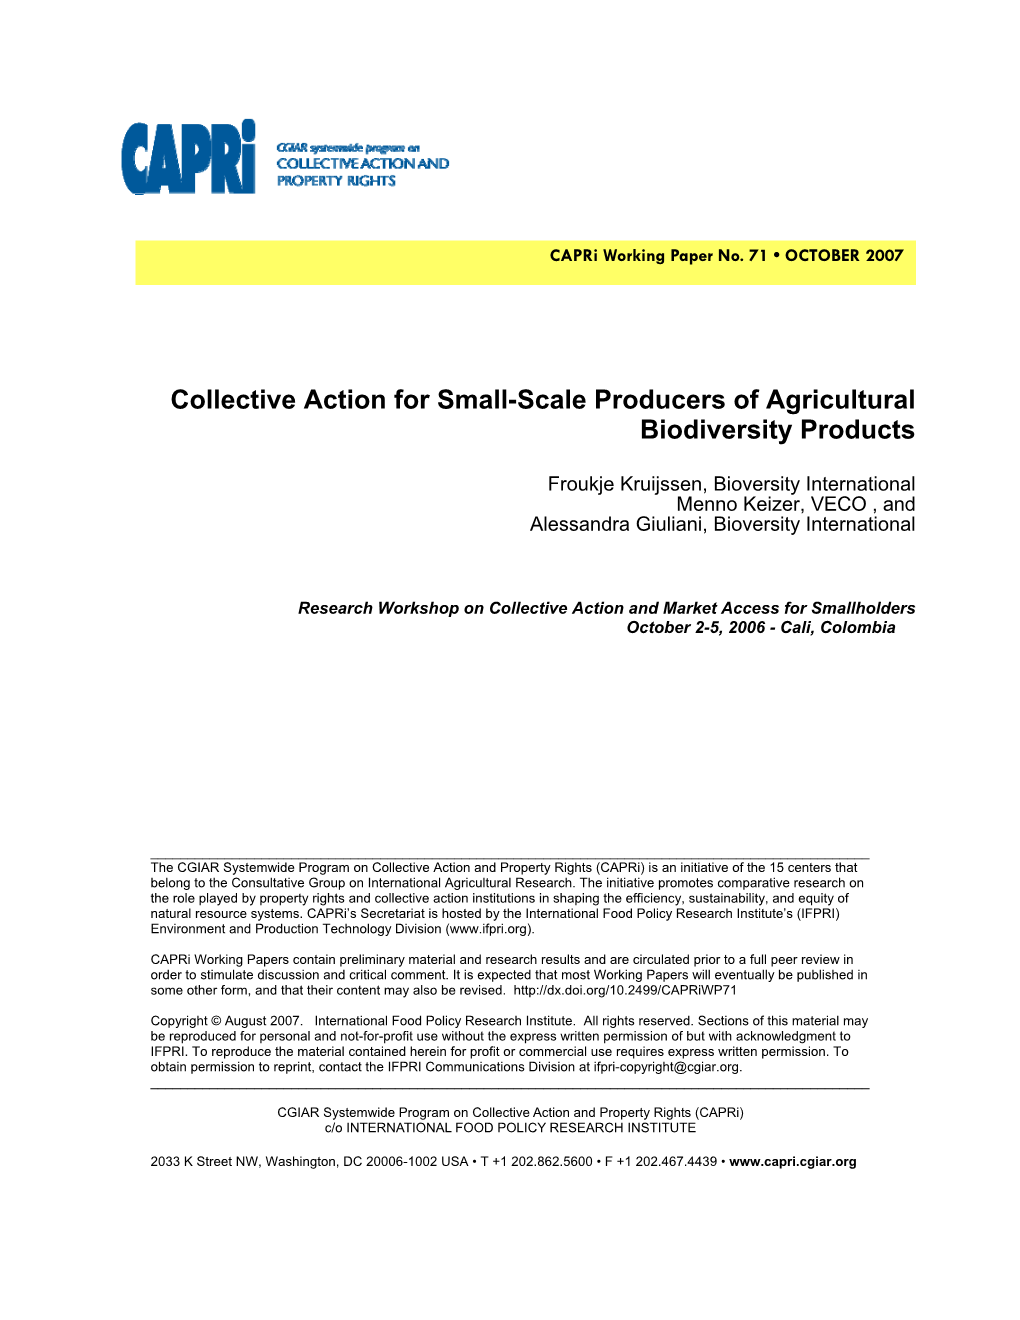 Collective Action for Small-Scale Producers of Agricultural Biodiversity Products